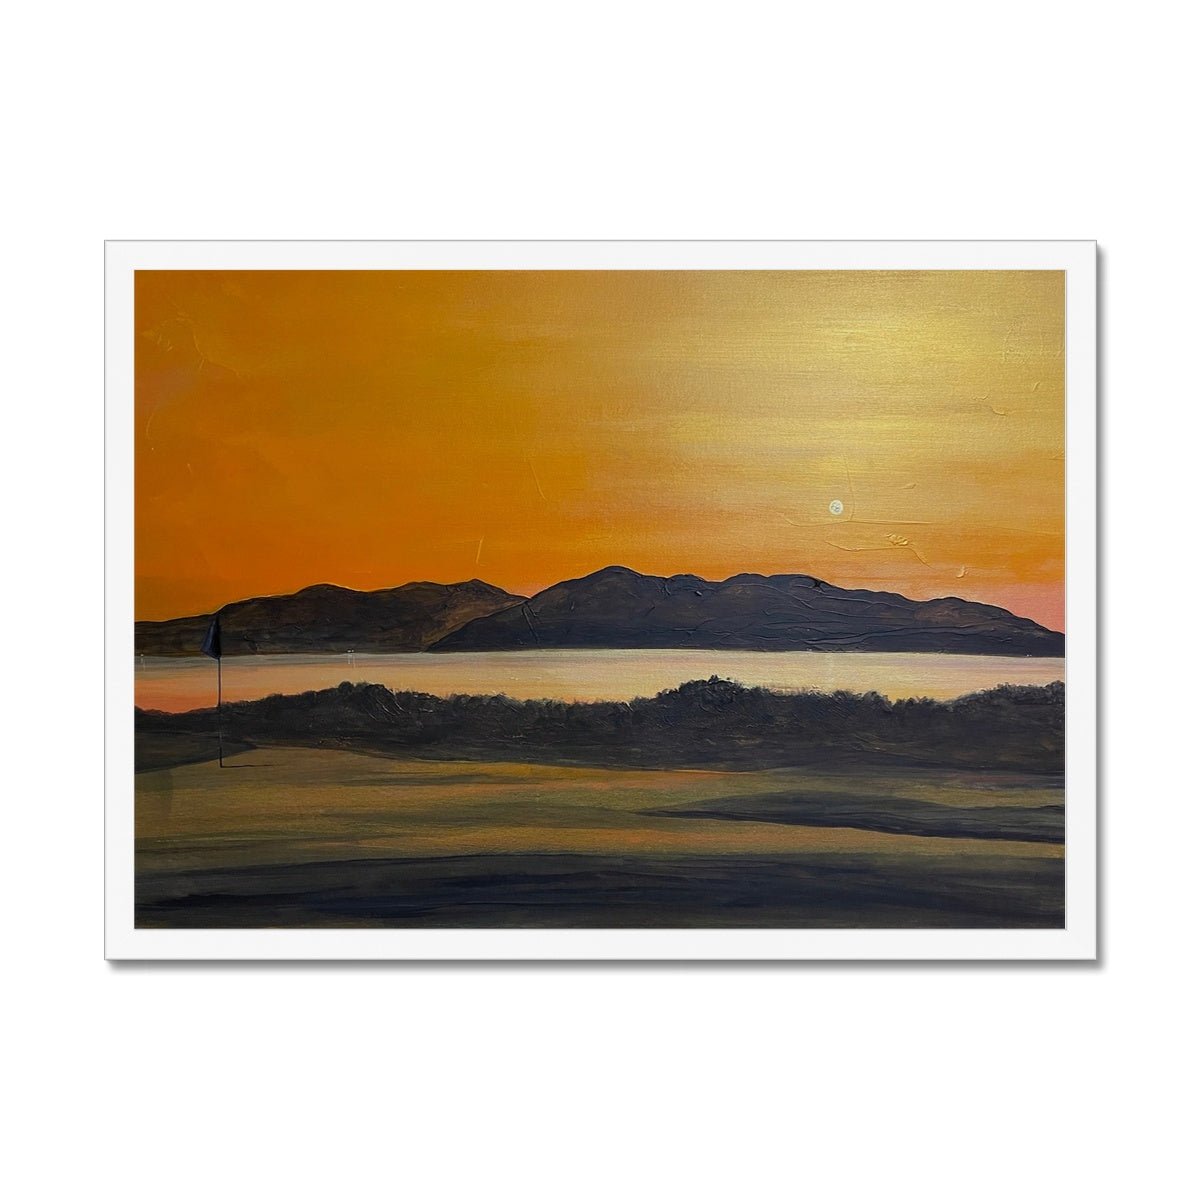 Arran & The 5th Green Royal Troon Golf Course Painting | Framed Prints From Scotland-Framed Prints-Arran Art Gallery-A2 Landscape-White Frame-Paintings, Prints, Homeware, Art Gifts From Scotland By Scottish Artist Kevin Hunter